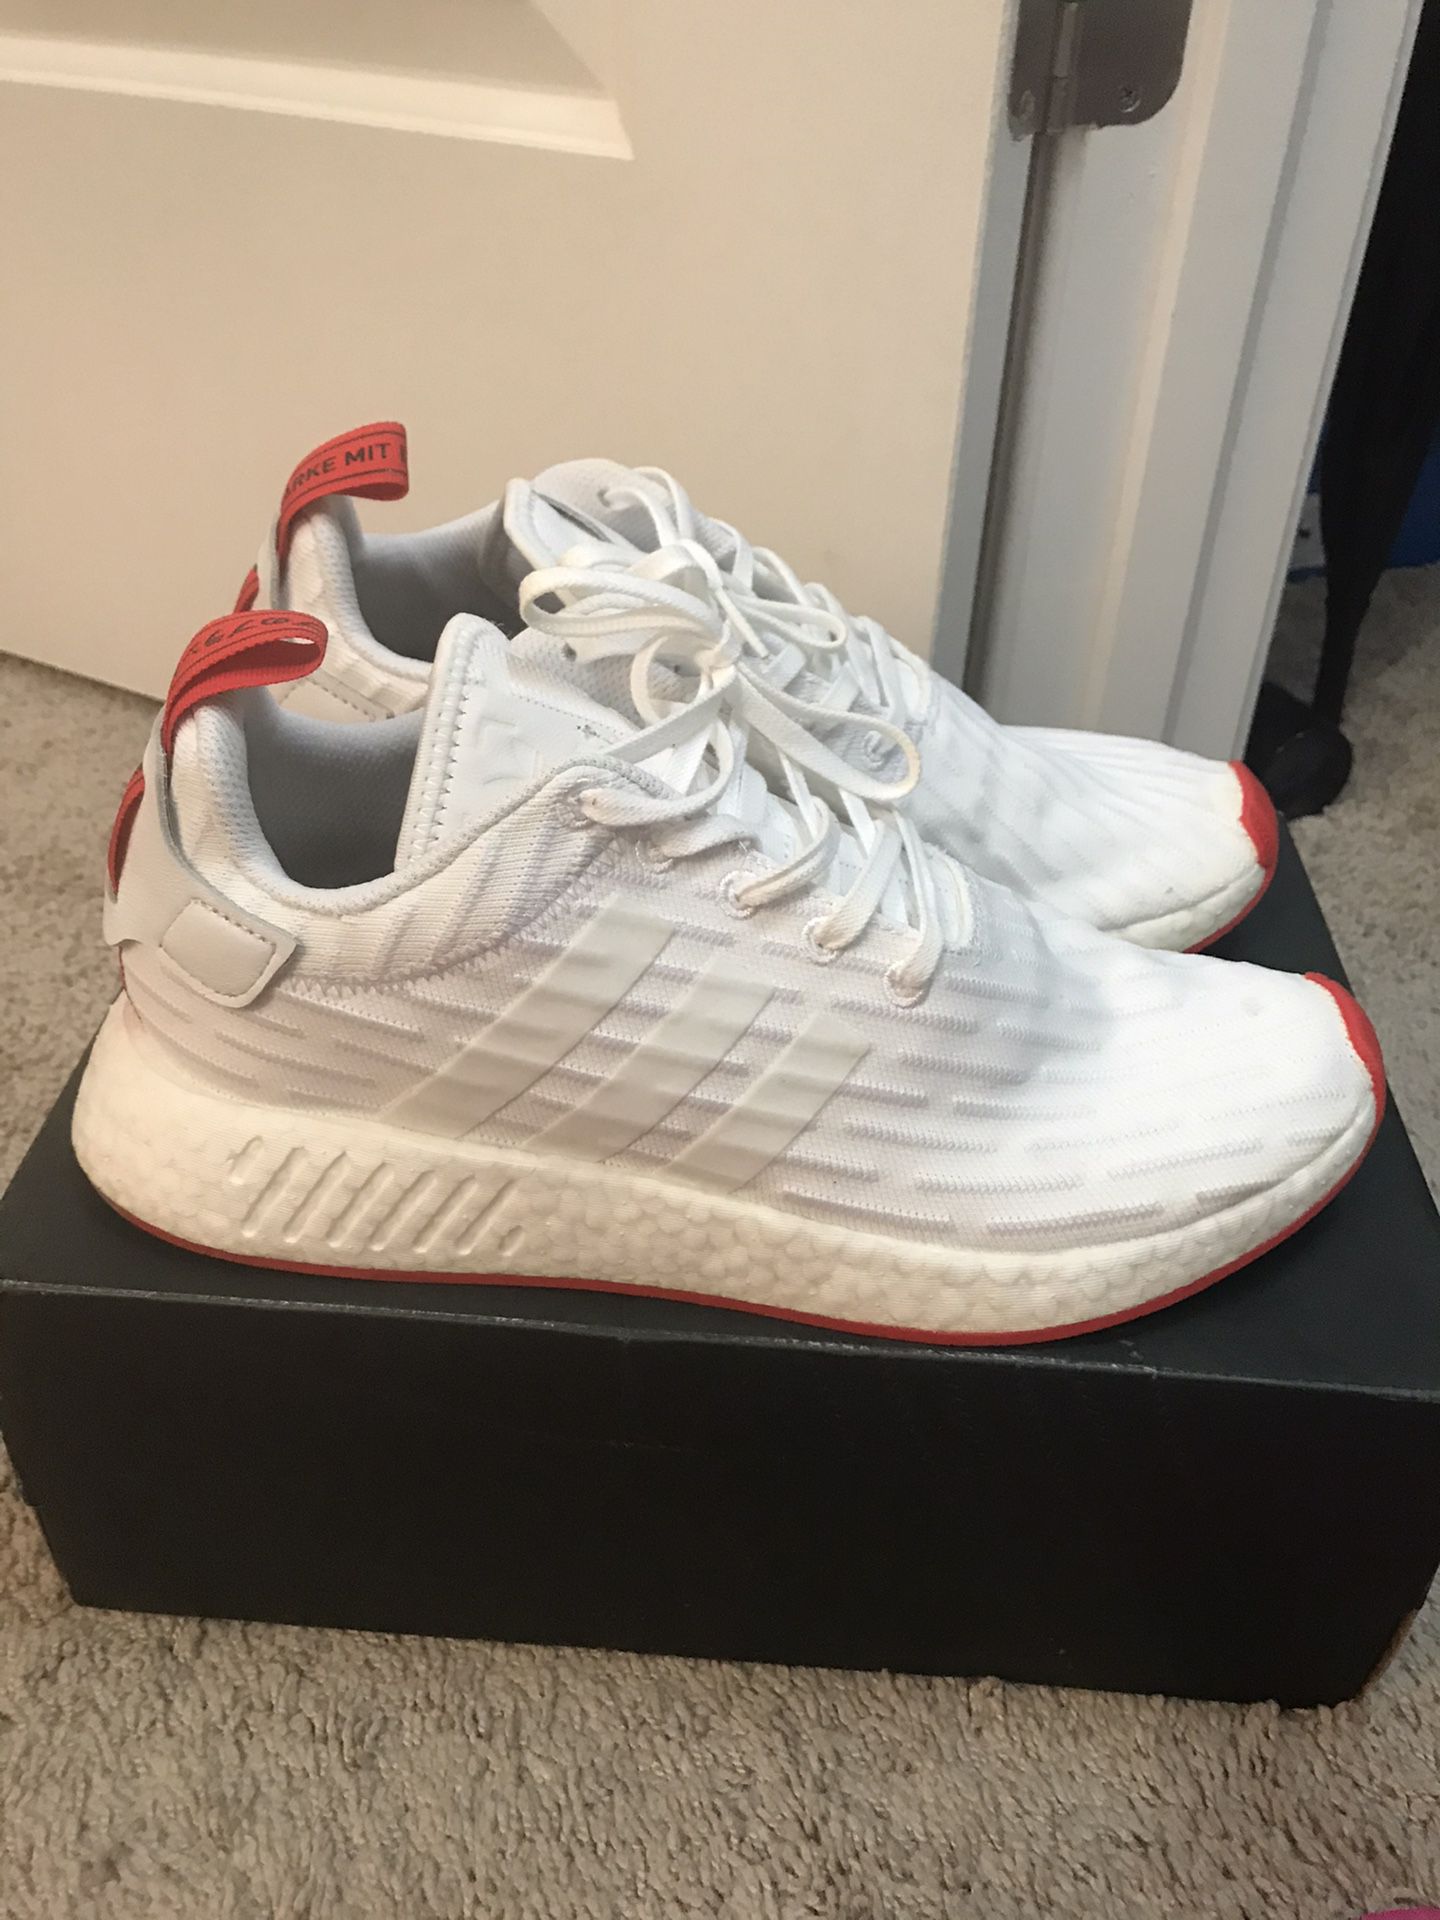 Almost brand new nmd r2 core red